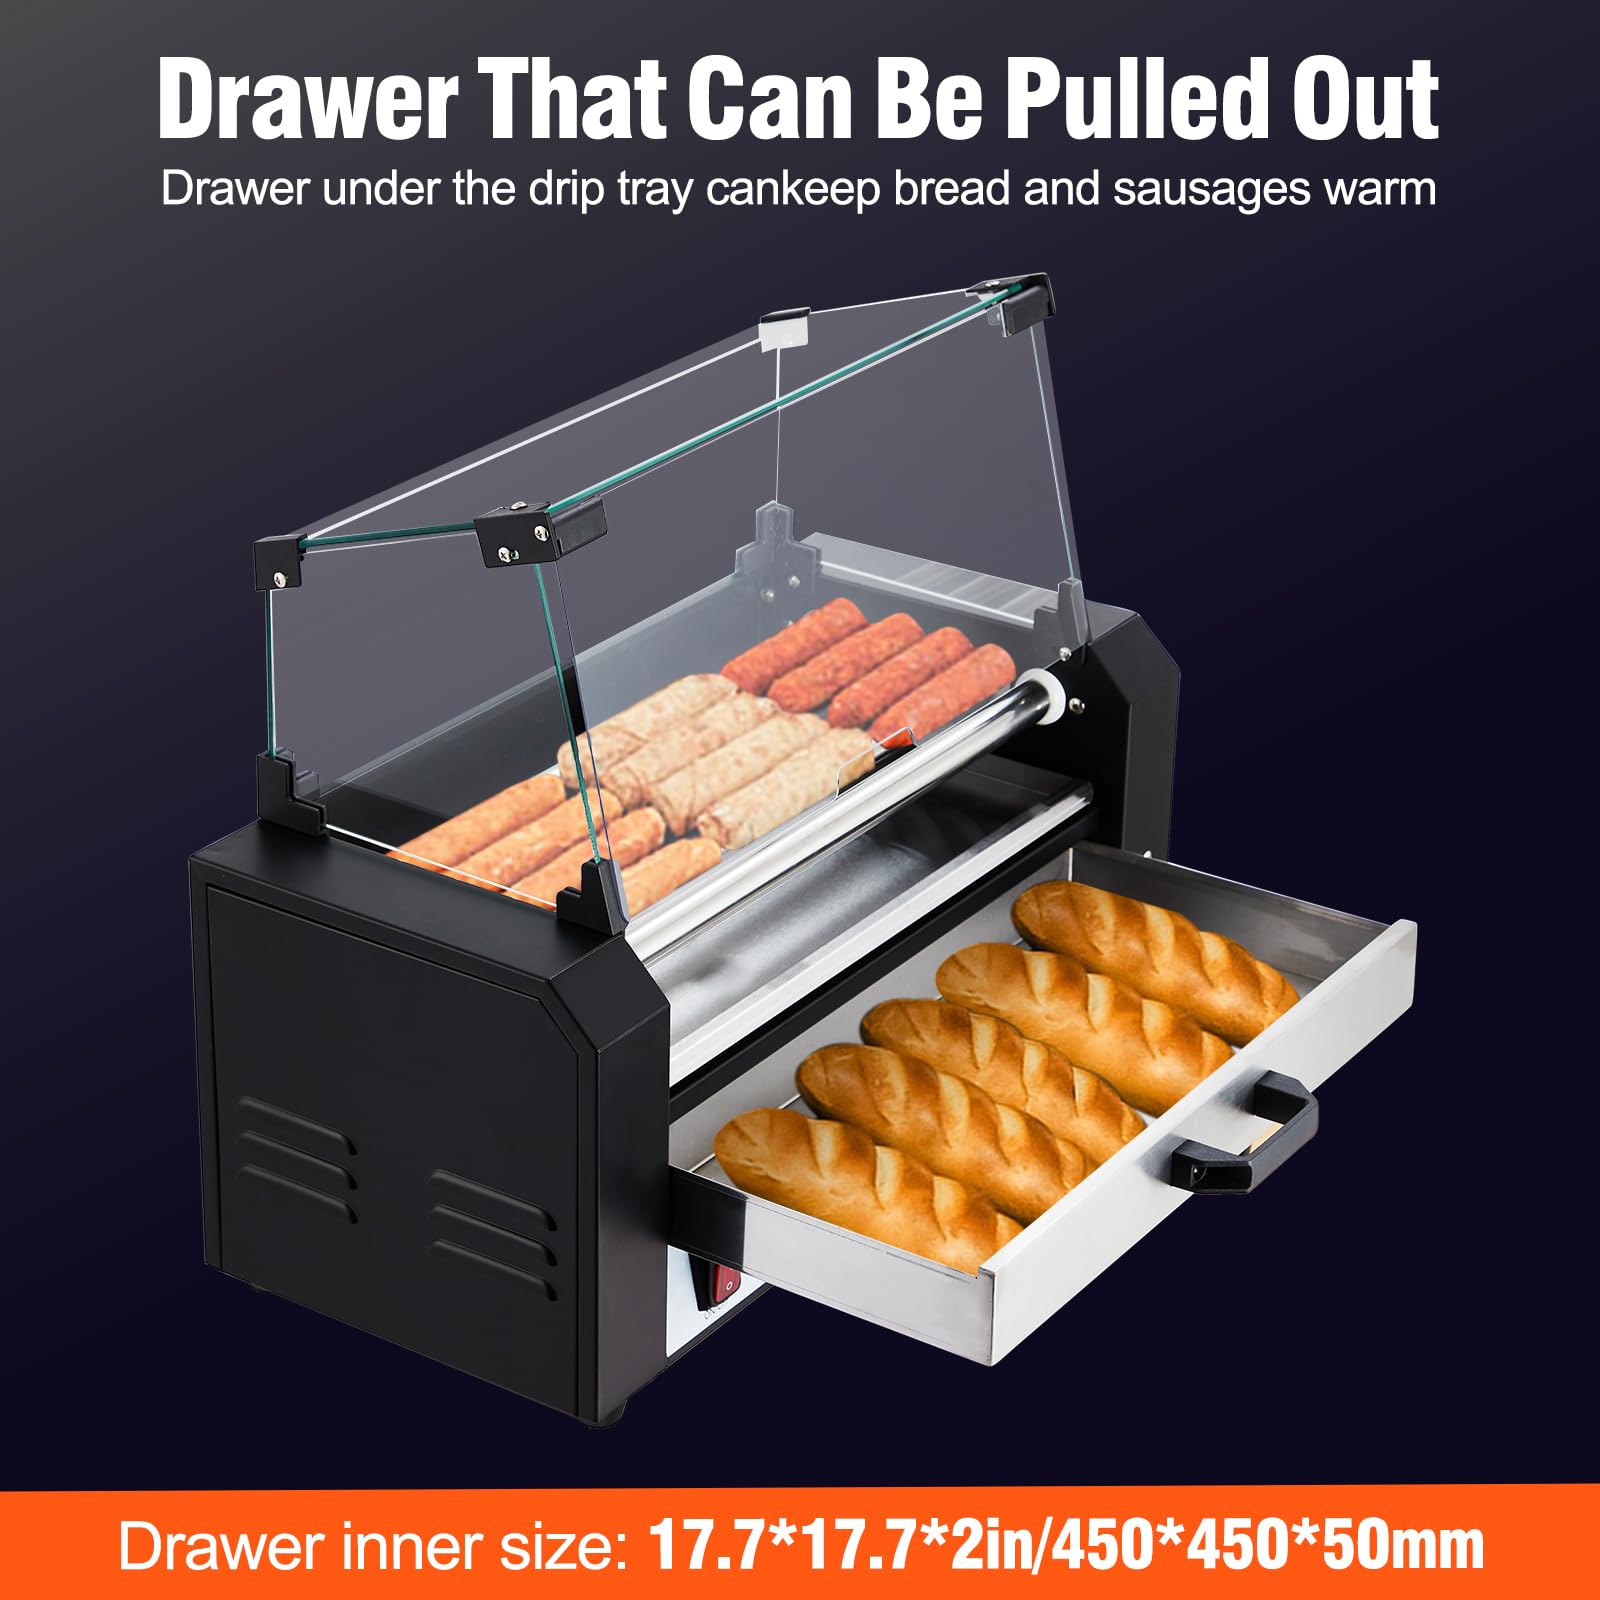 1050W 5-Roller Hot Dog Grill, 12 Capacity, Stainless Steel